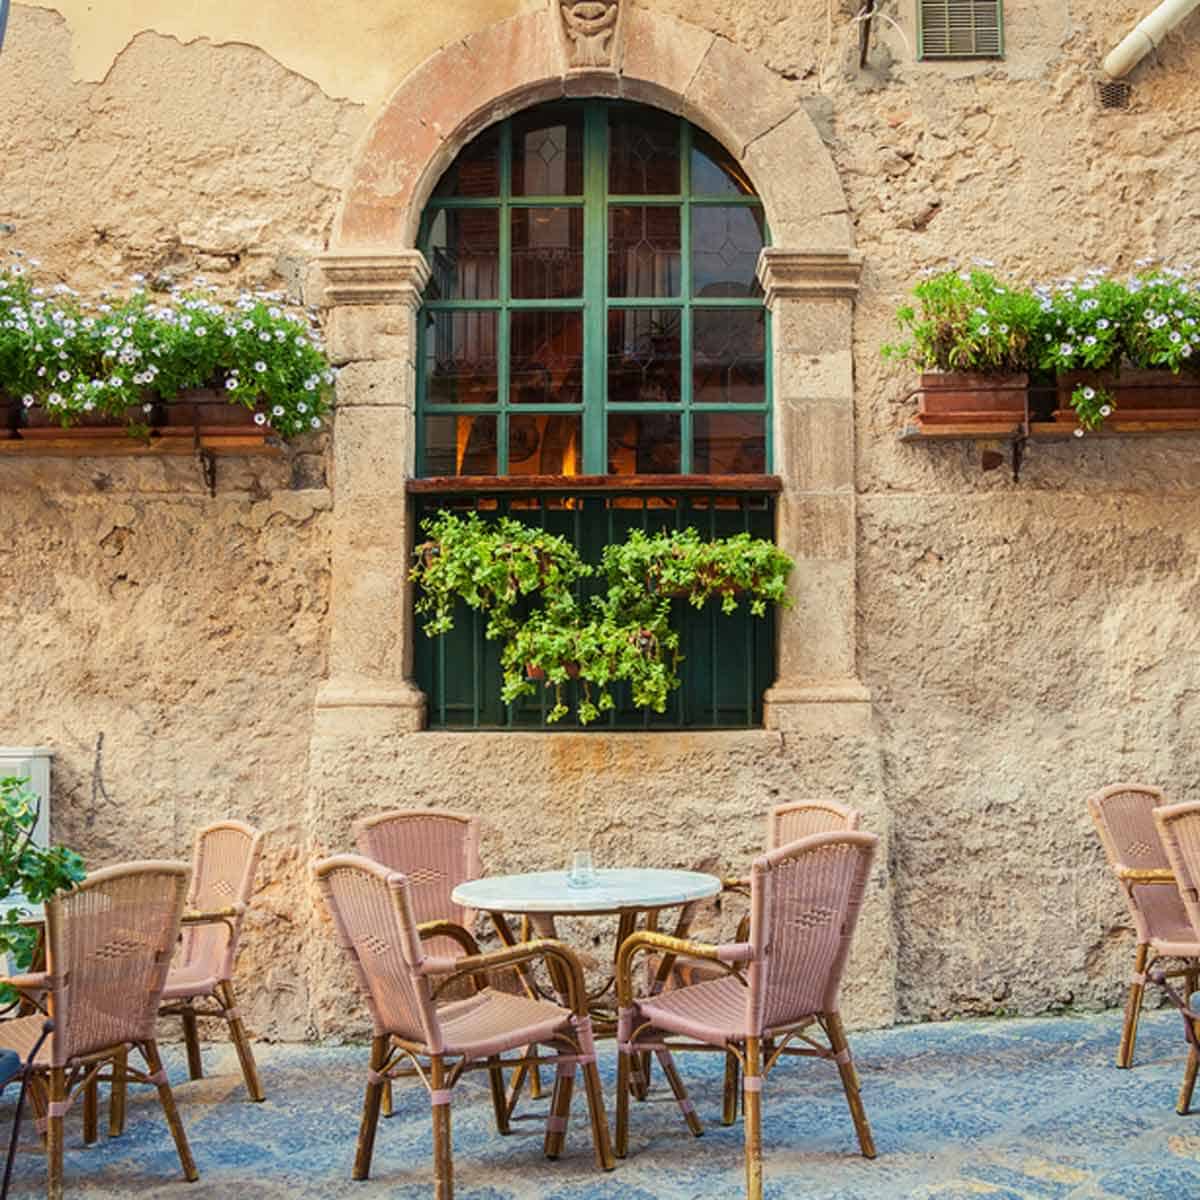 An outdoor cafe with chairs and a table in Sicily.